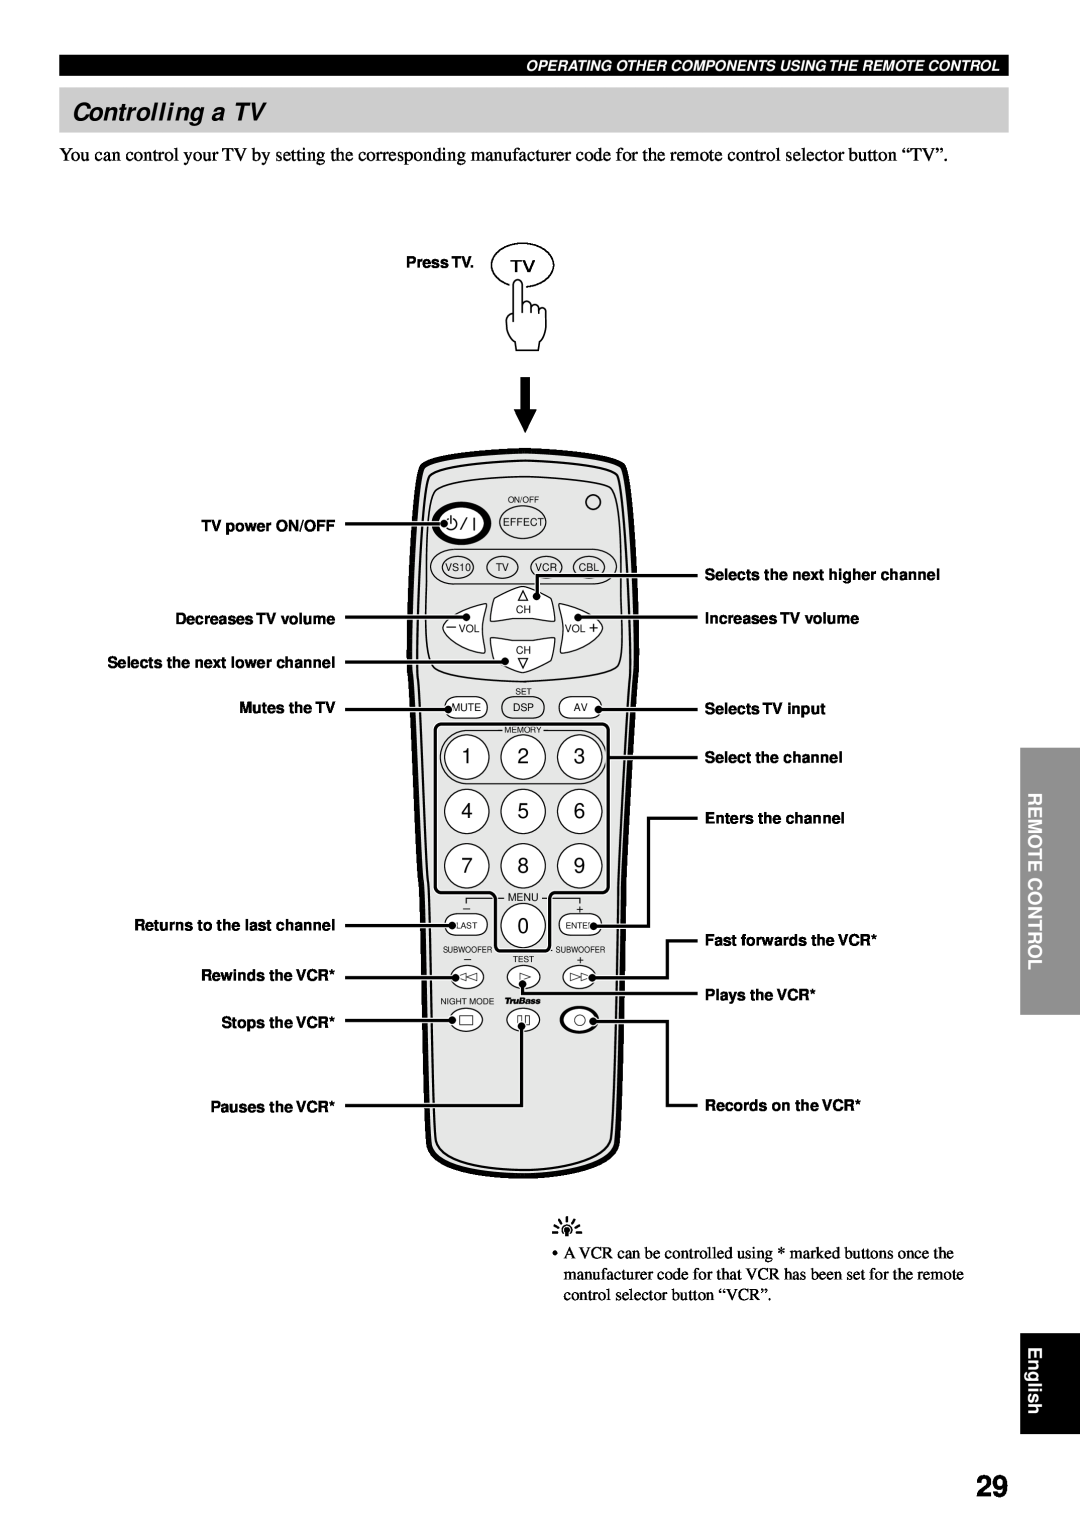 Yamaha VS-10 Controlling a TV, Remote Control, English, Press TV, TV power ON/OFF Decreases TV volume, Stops the VCR 